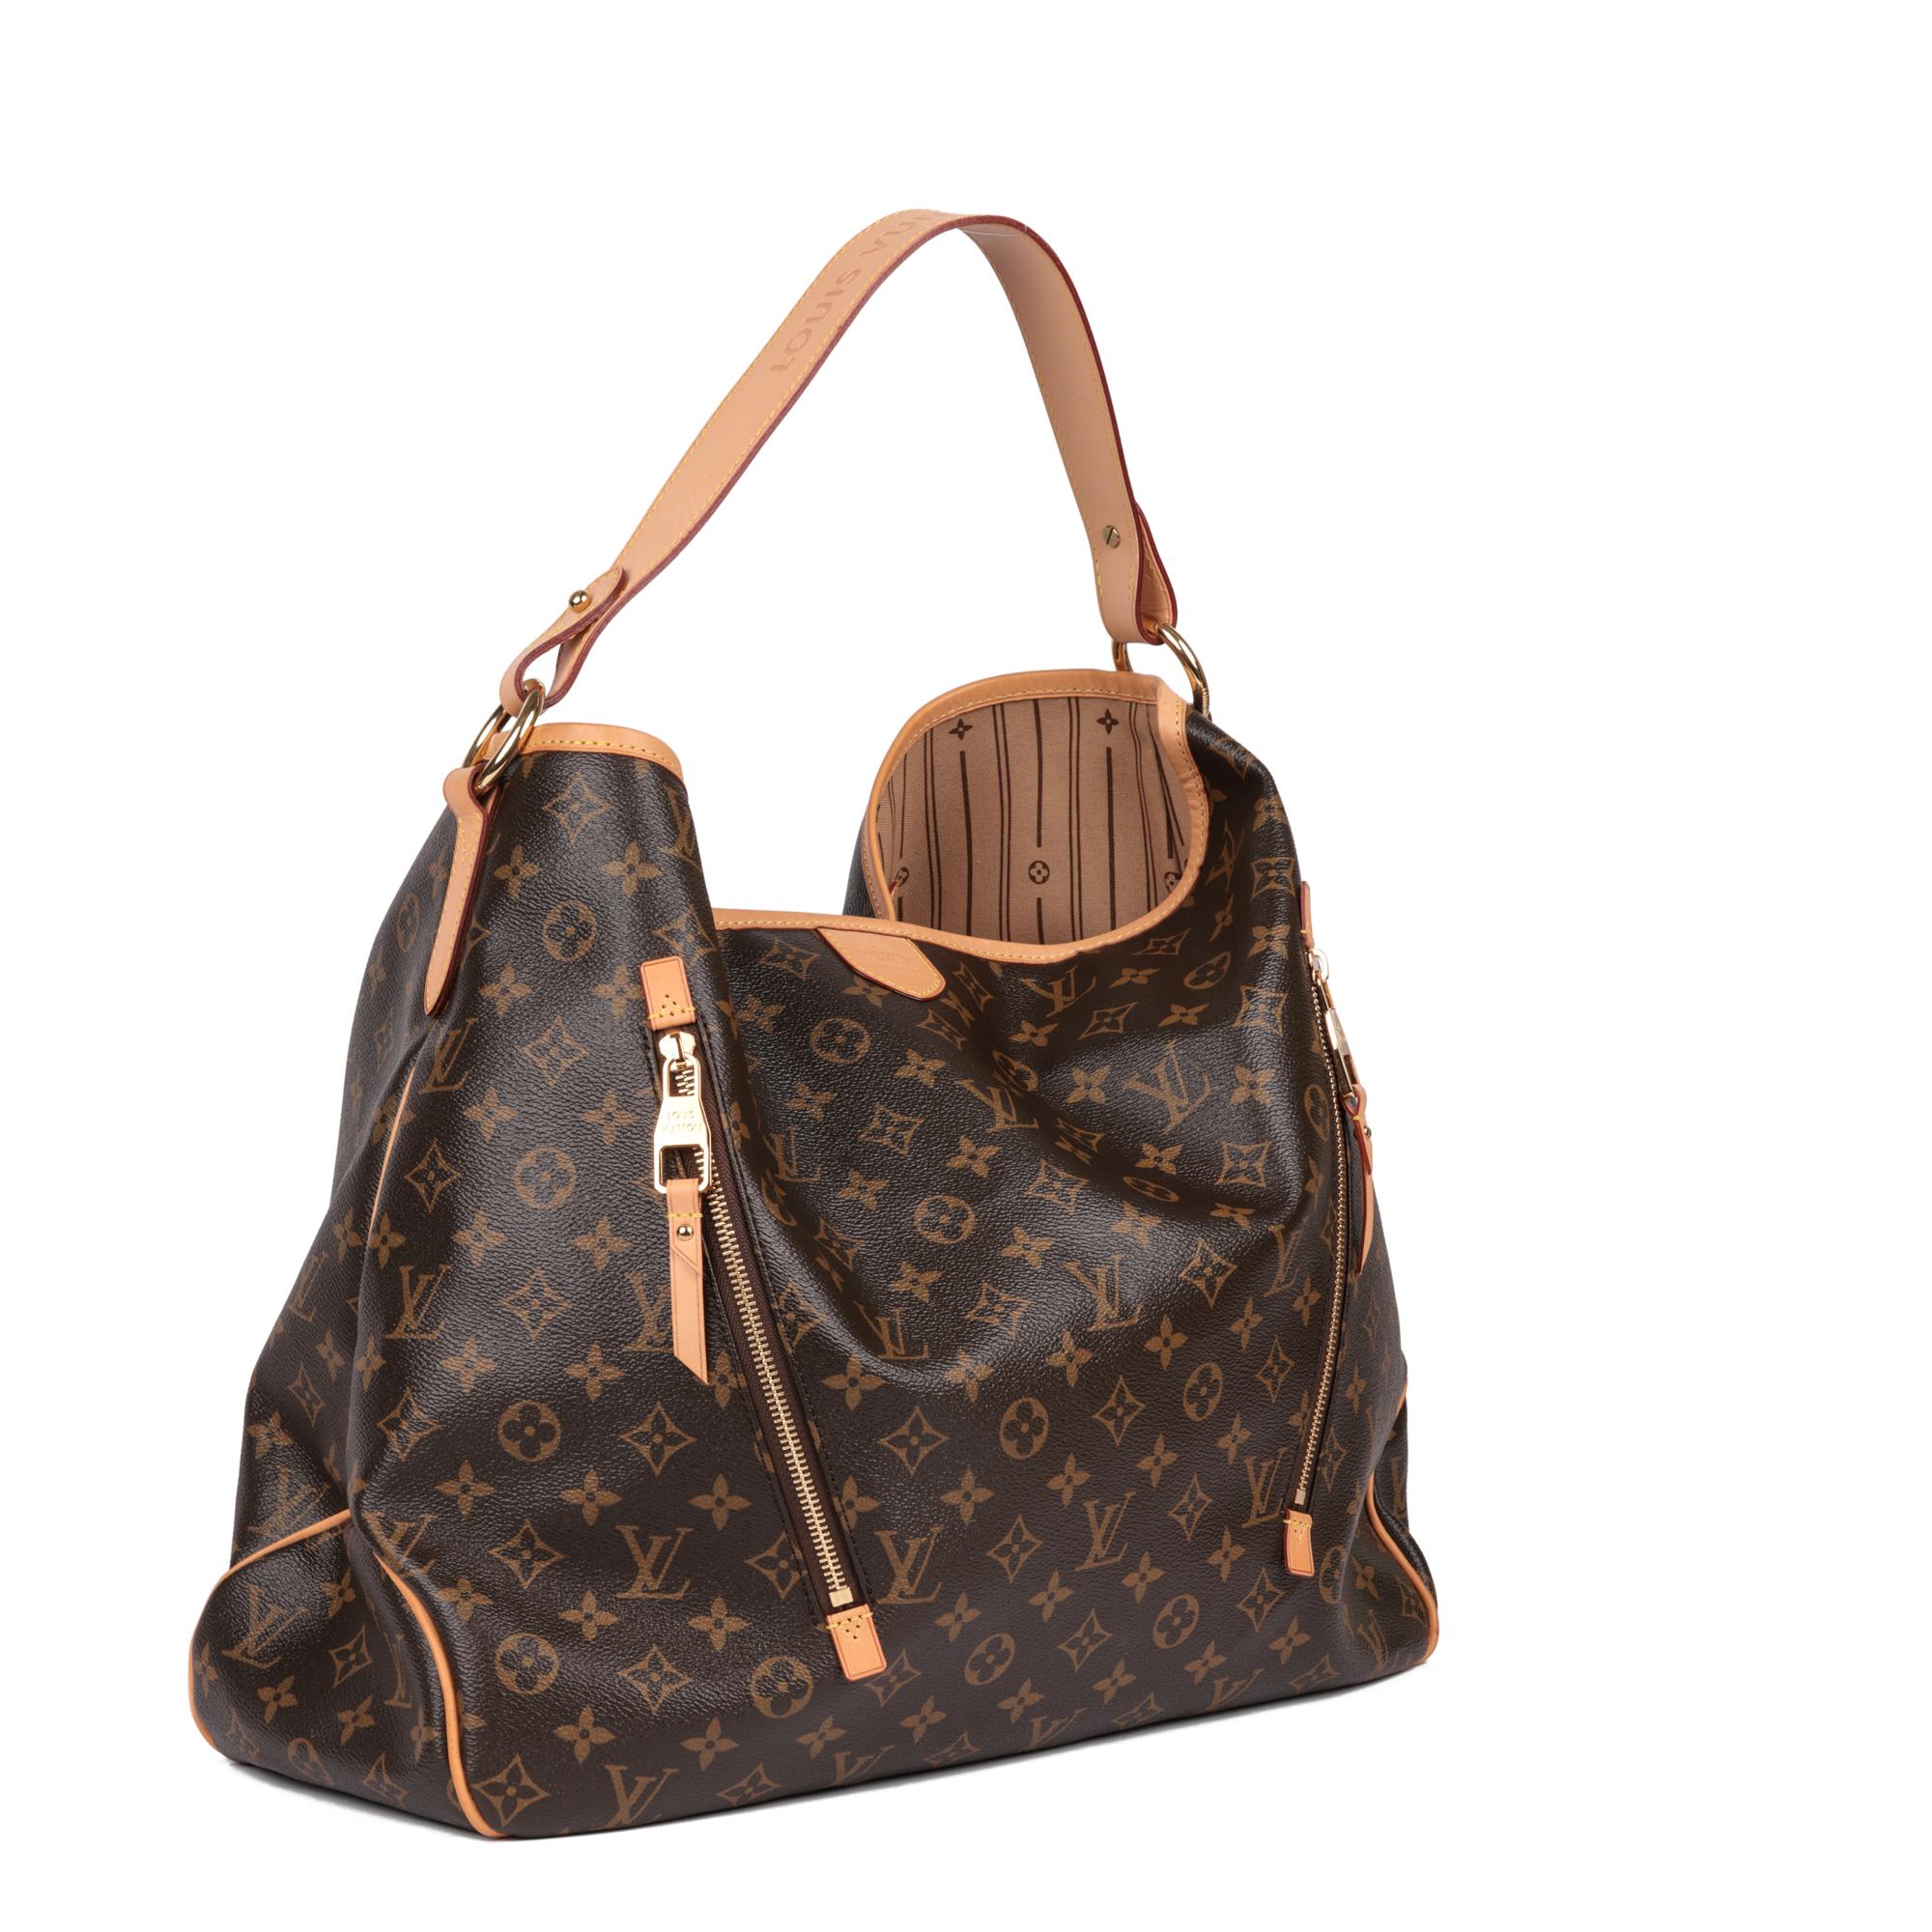 LOUIS VUITTON
Brown Monogram Canvas & Vachetta Leather Delightful GM

Xupes Reference: HB5173
Serial Number: FL1192
Age (Circa): 2012
Accompanied By: Louis Vuitton Dust Bag
Authenticity Details: Date Stamp (Made in France)
Gender: Ladies
Type: Top